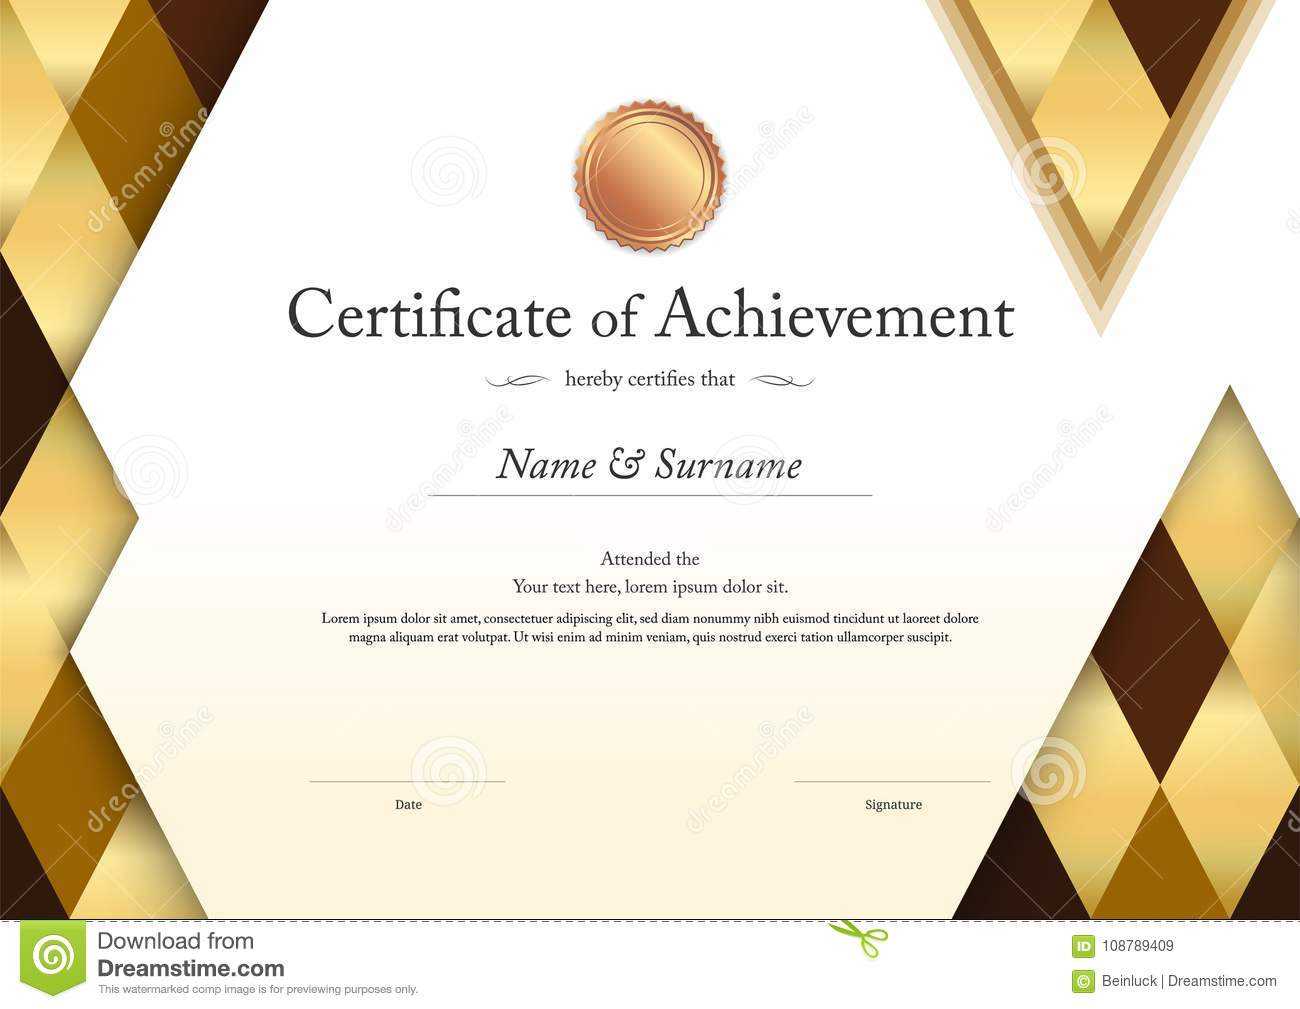 Luxury Certificate Template With Elegant Border Frame With Elegant Certificate Templates Free